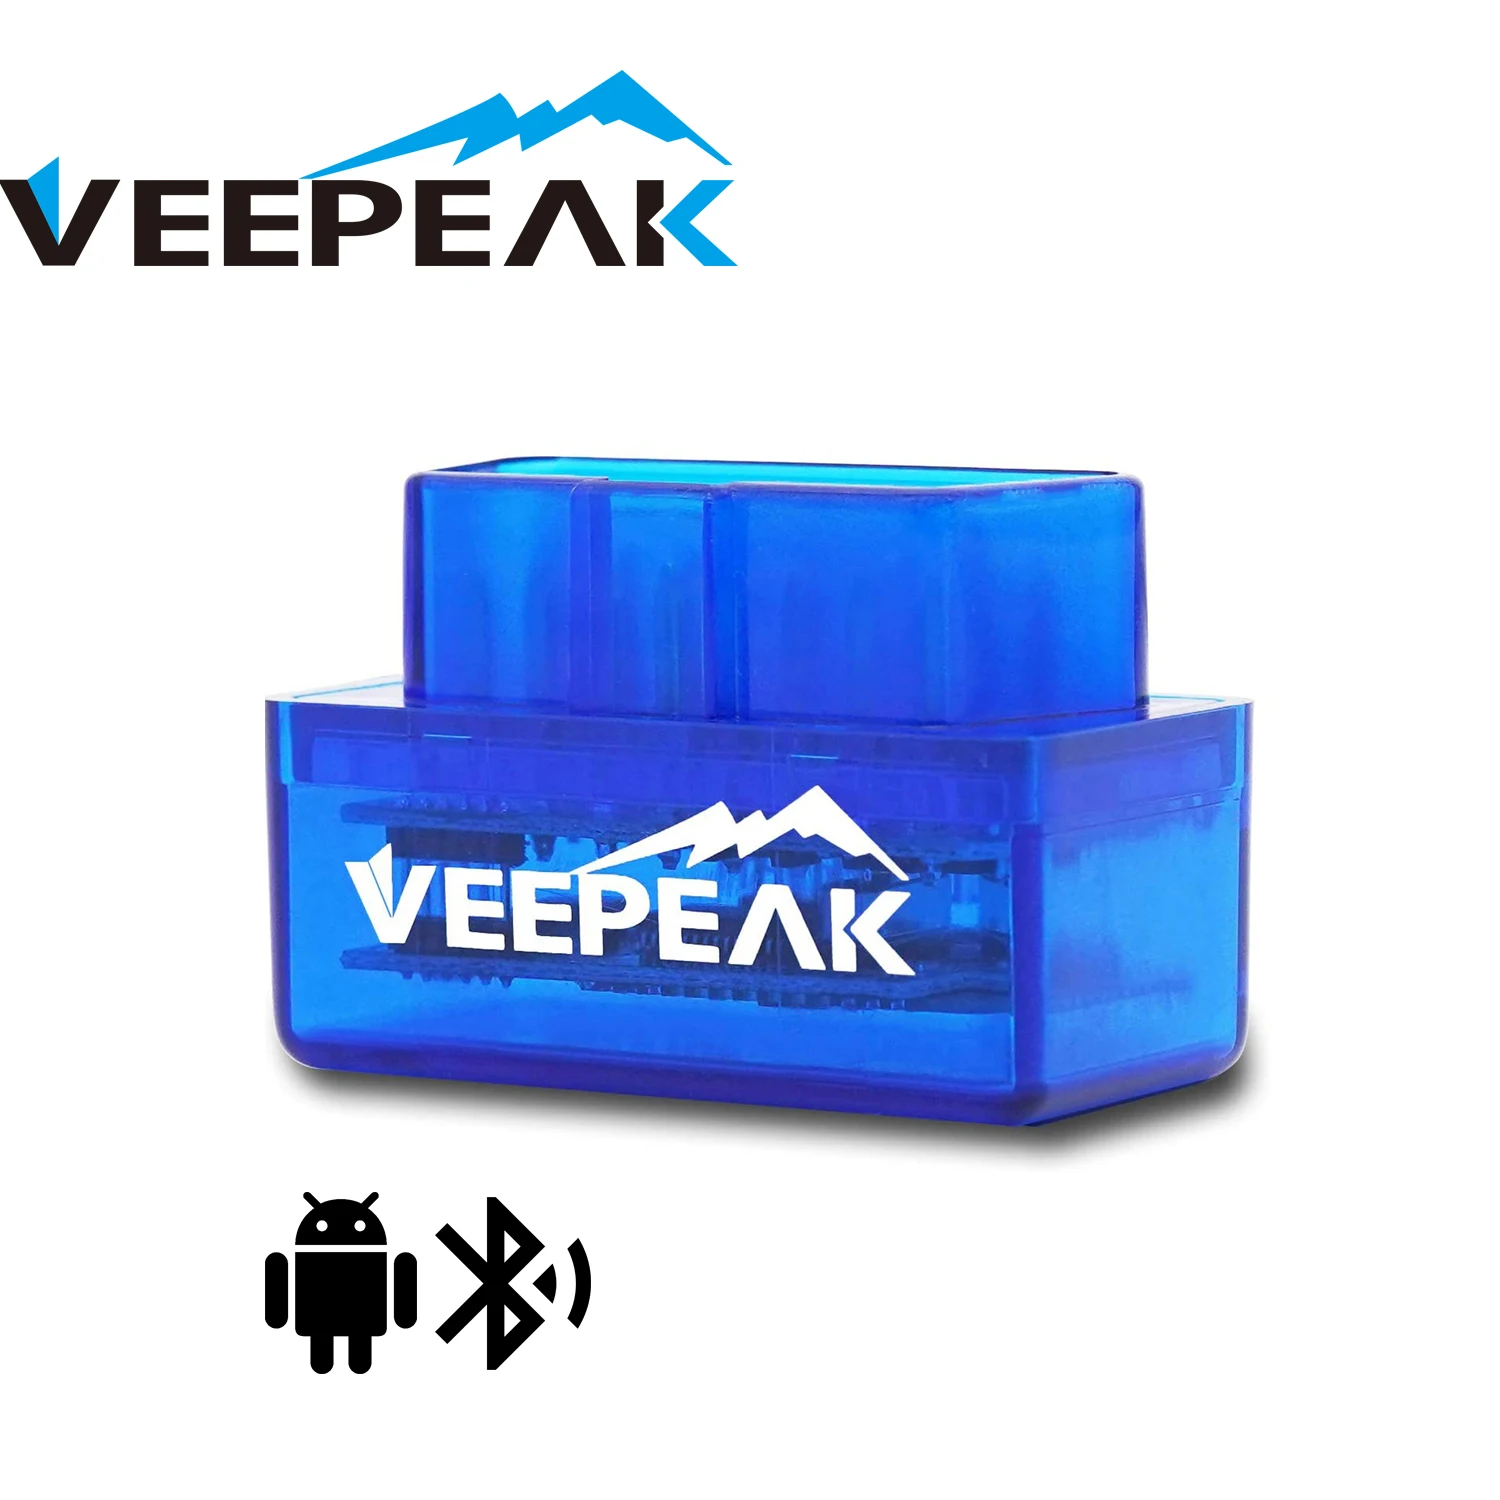 Veepeak Mini Bluetooth OBD2 Scanner for Android, Car OBD II Diagnostic Scan Tool Check Engine Light Code Reader, Supports Torque mucar cs90 professional obd2 scanner tools 28 maintenance services ecm system lifetime free updater all car scan diagnostic tool